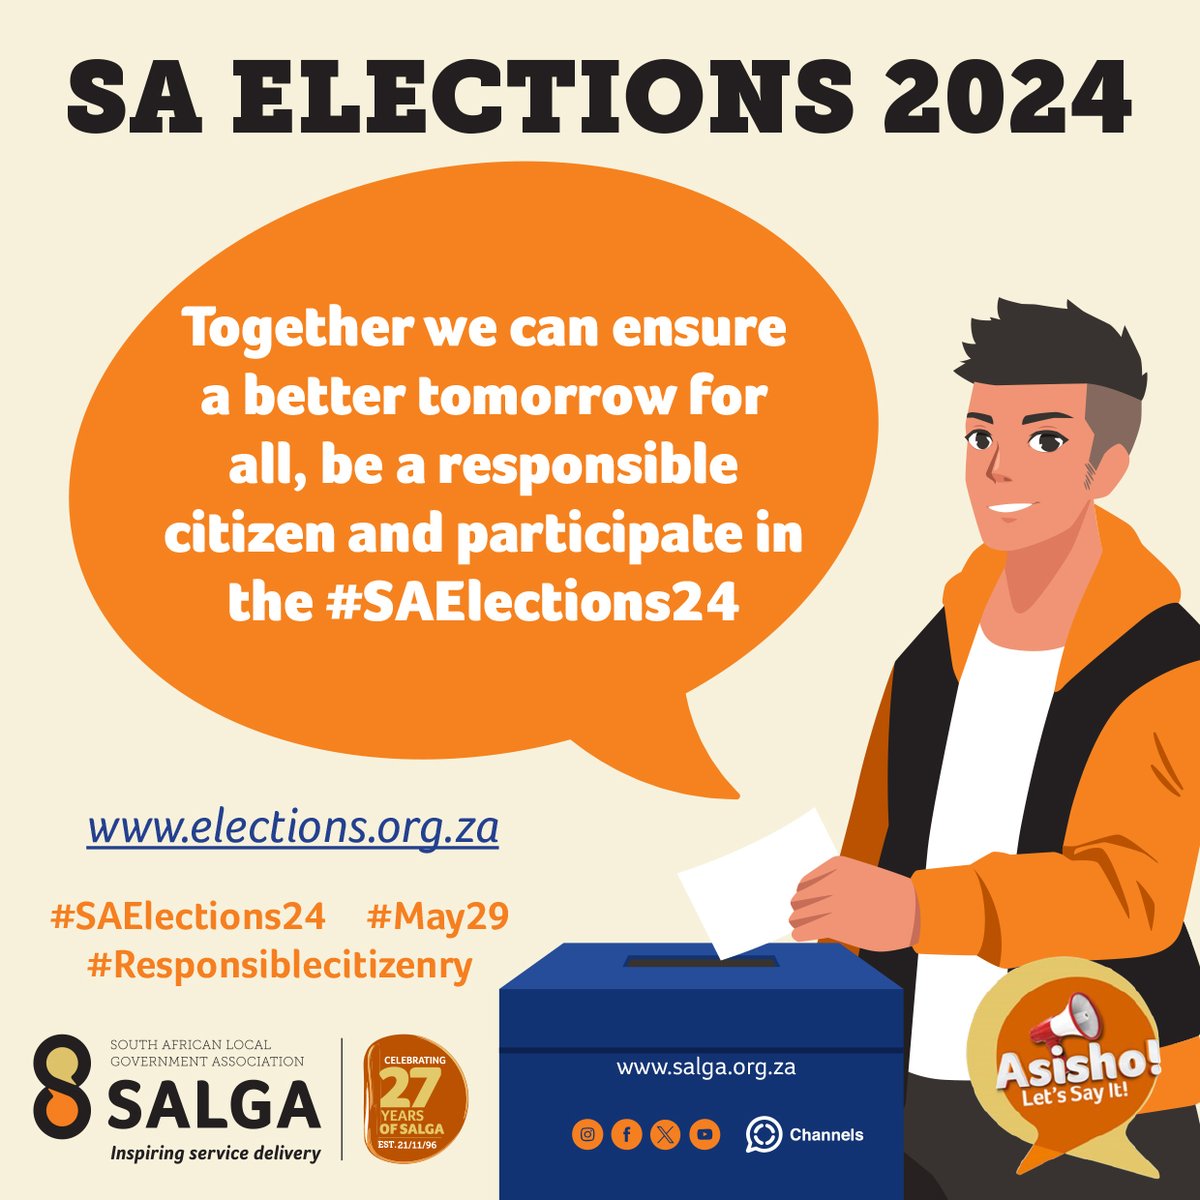 Be a responsible citizen and participate in the #SAElections24. #May29